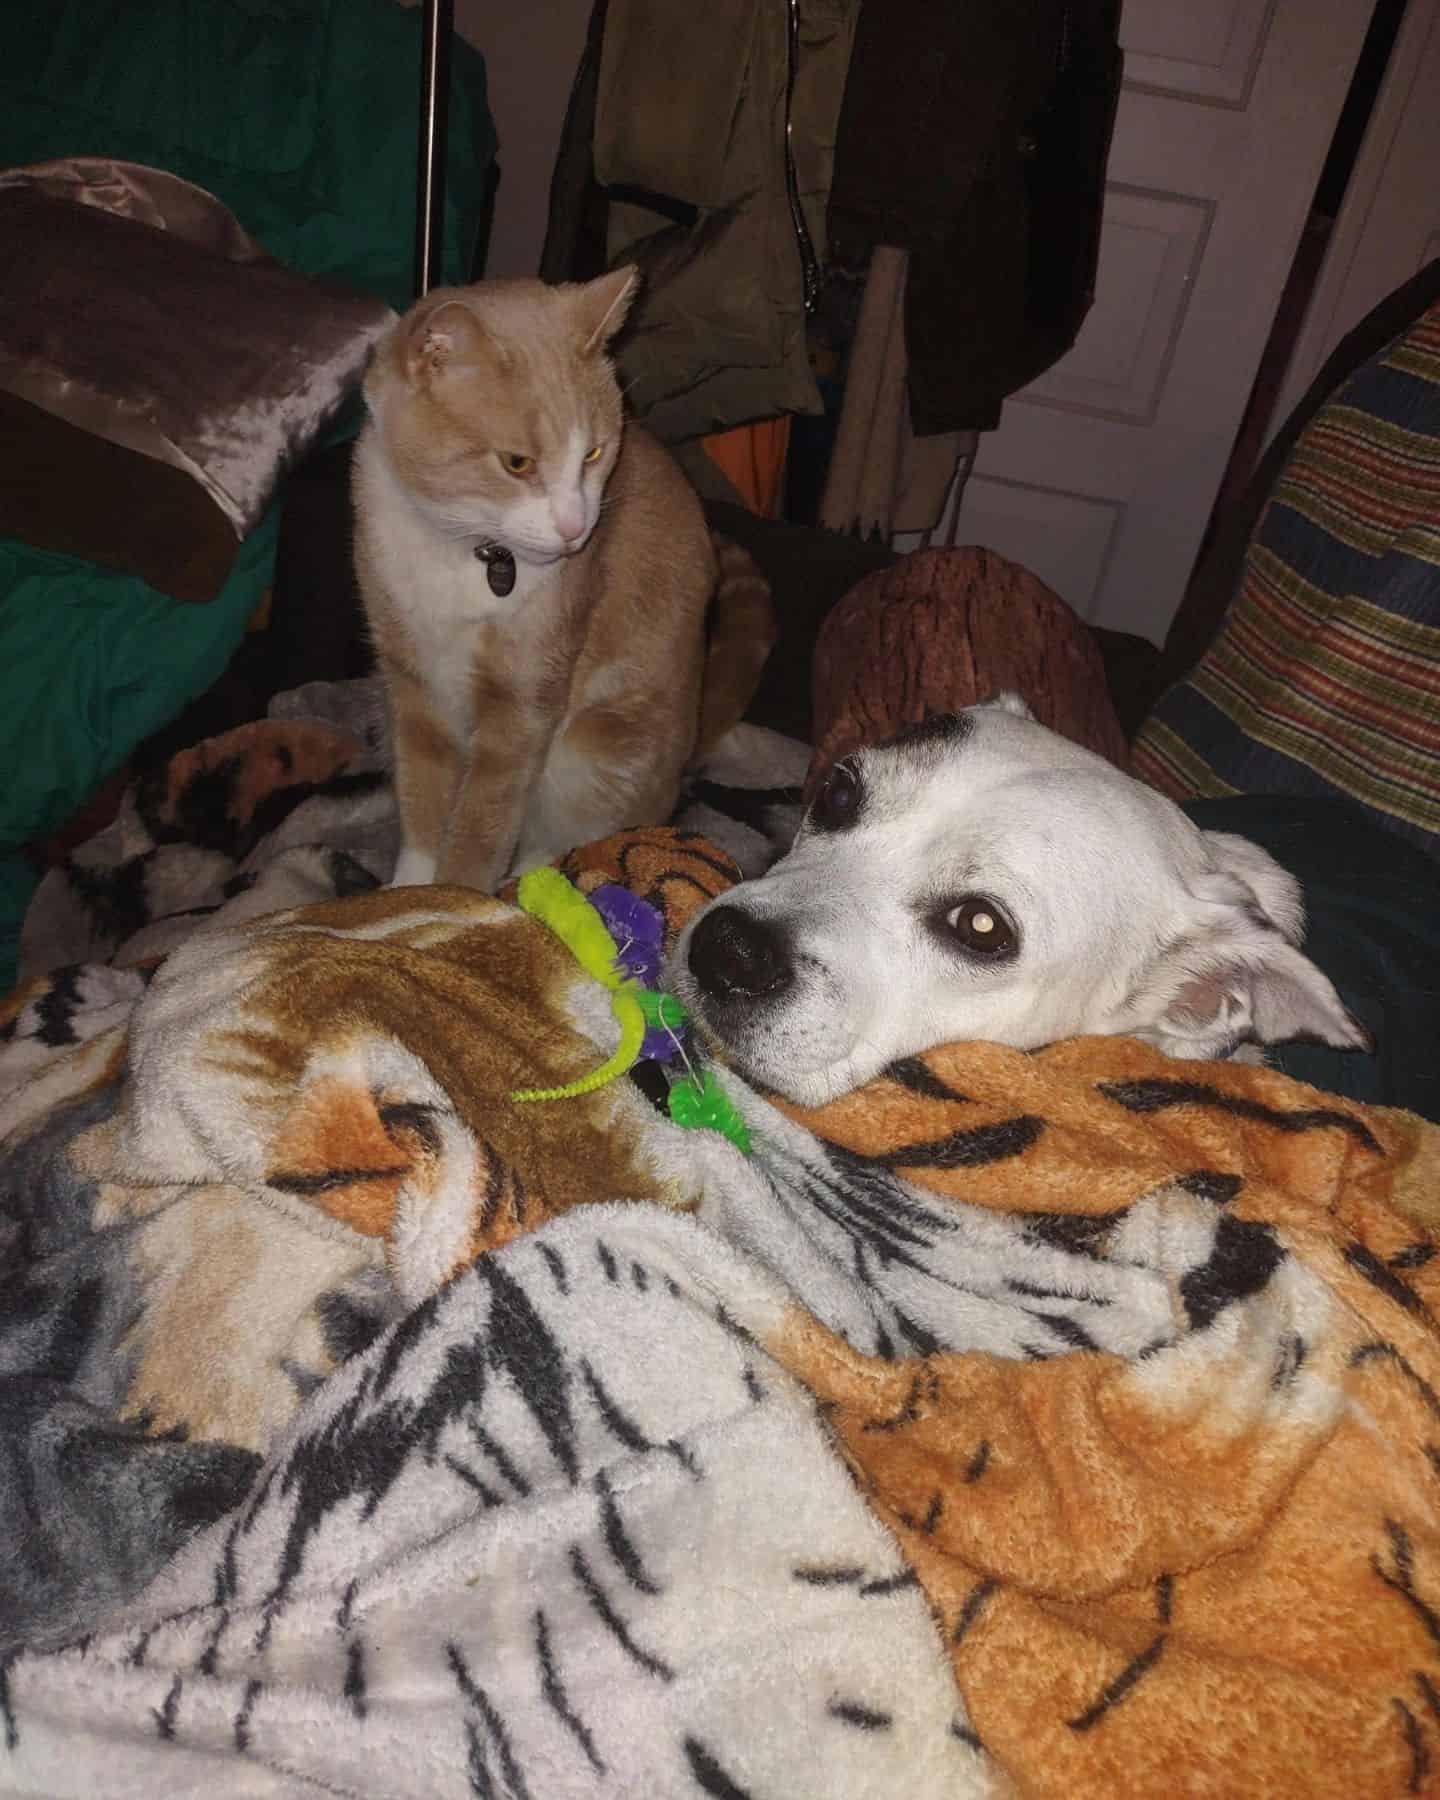 cat and dog in a messy room